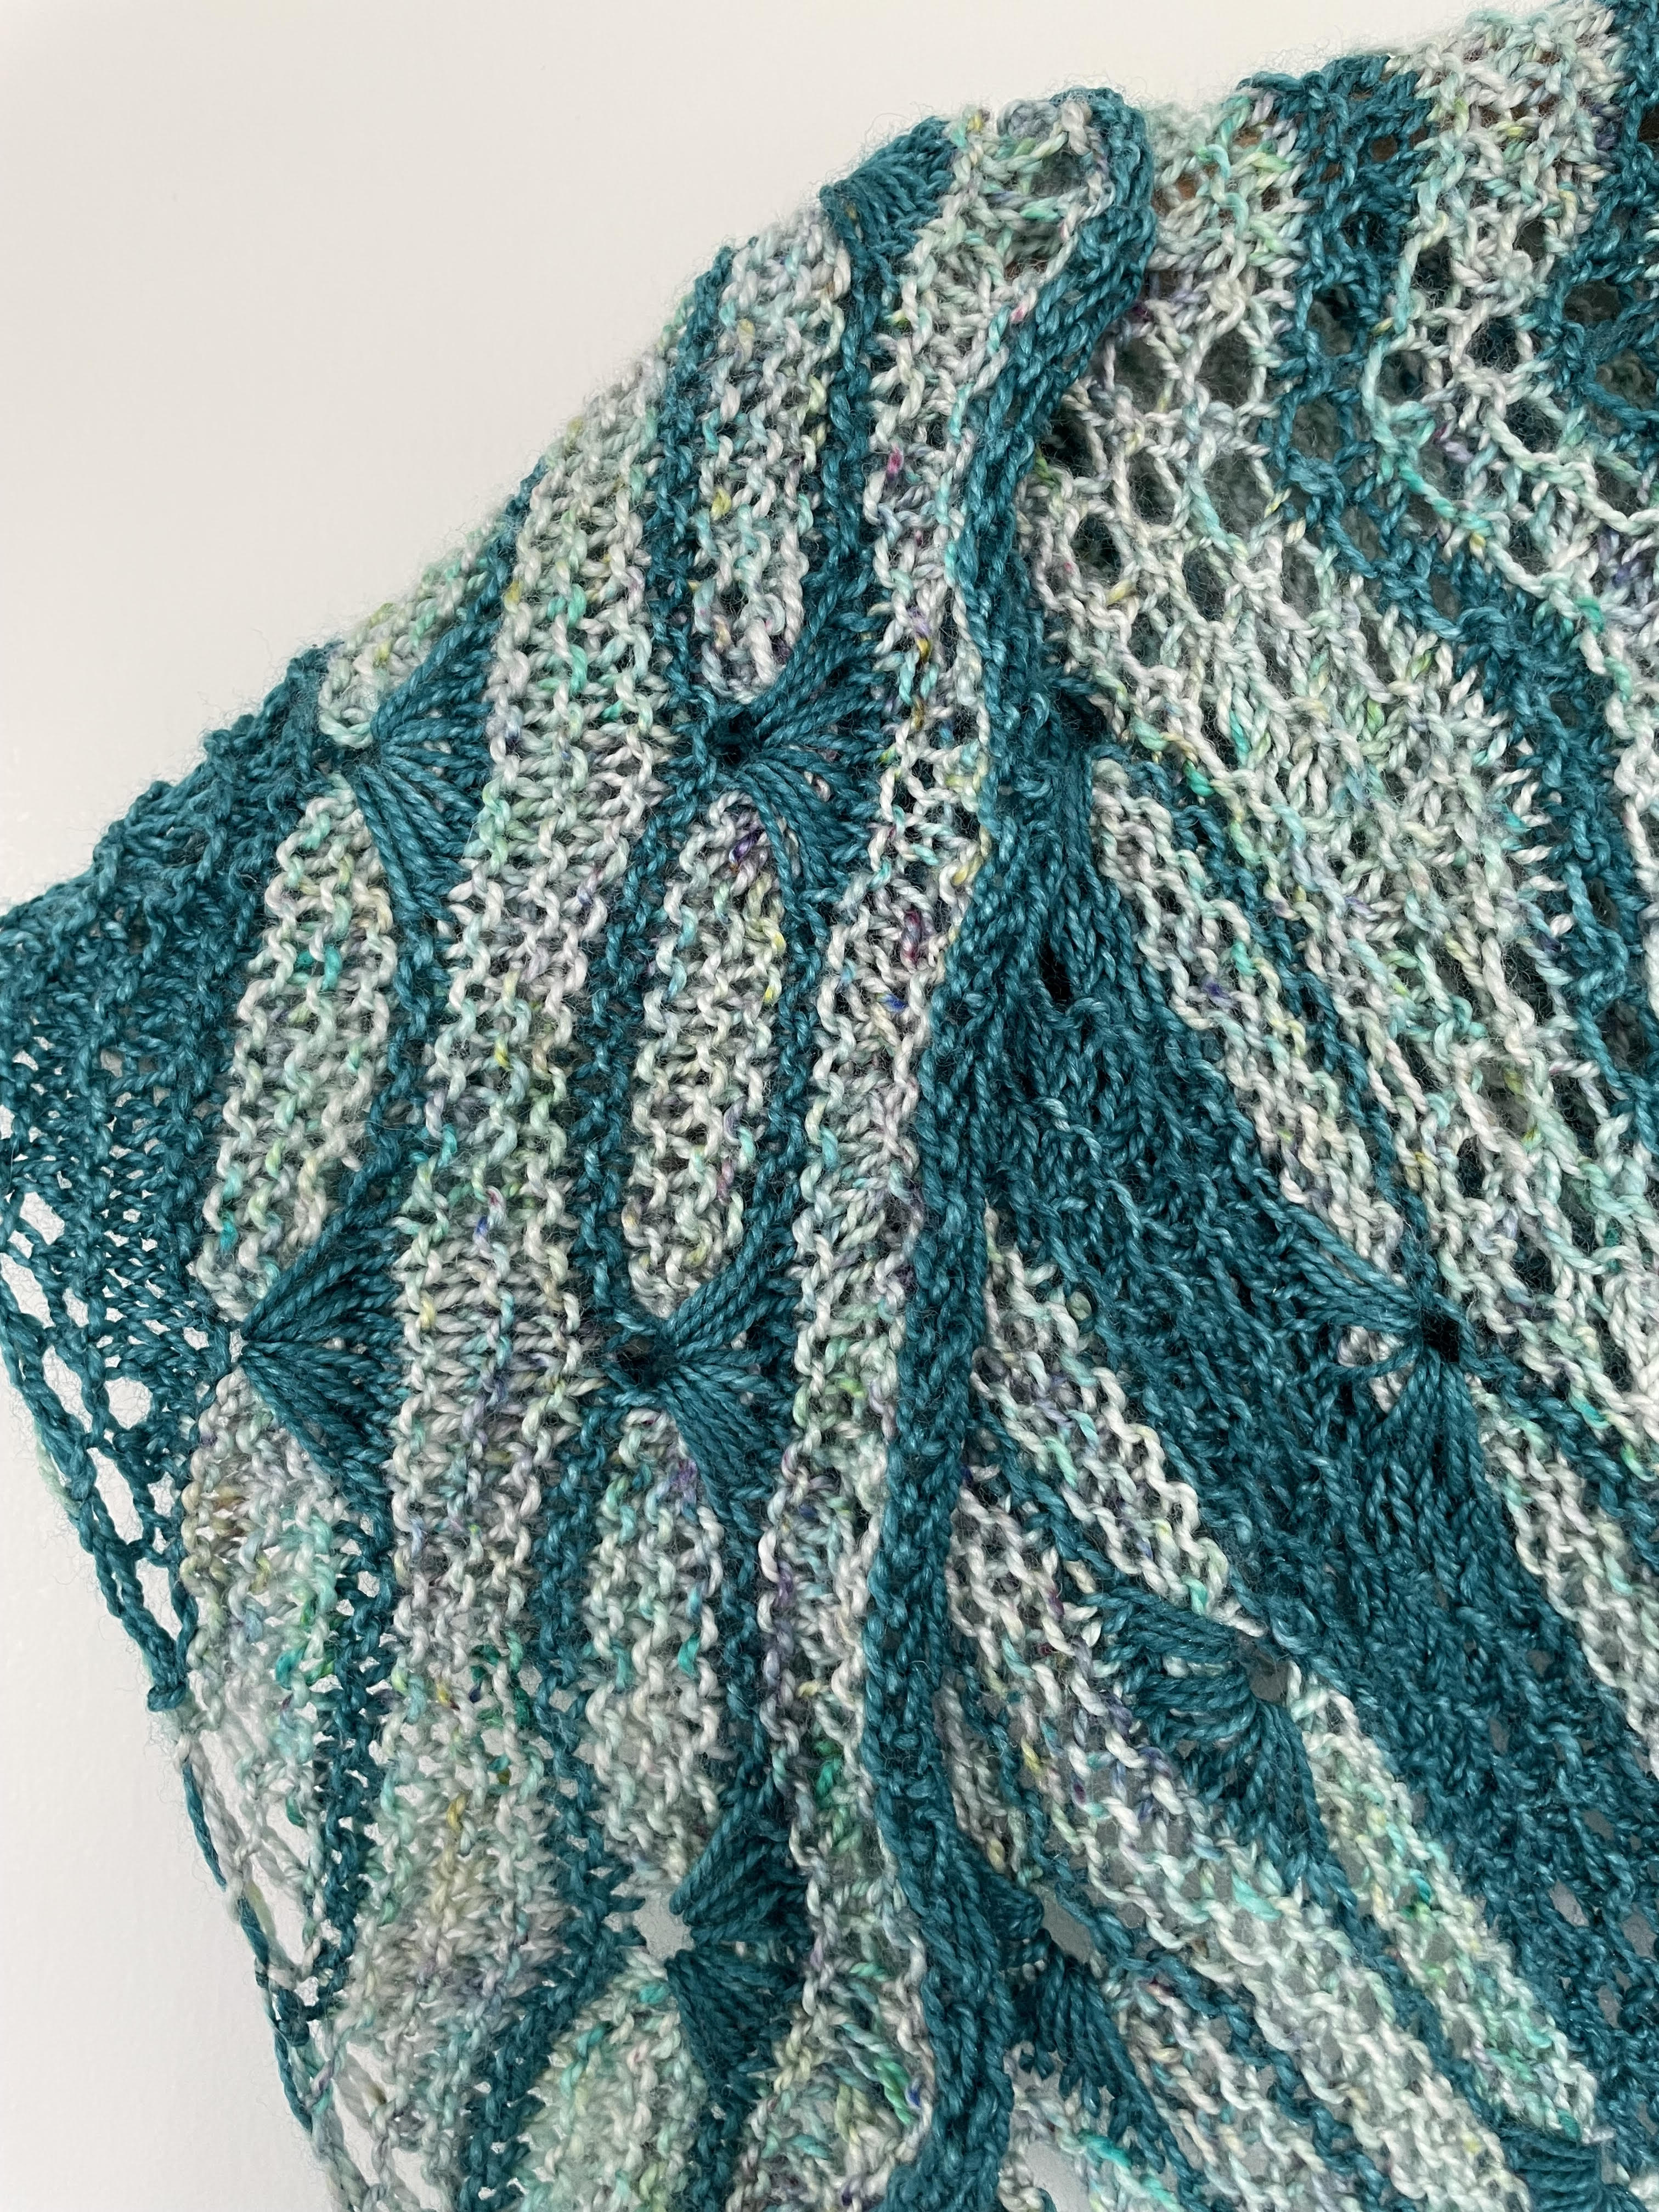 handknit shawl in teal and varigated yarn